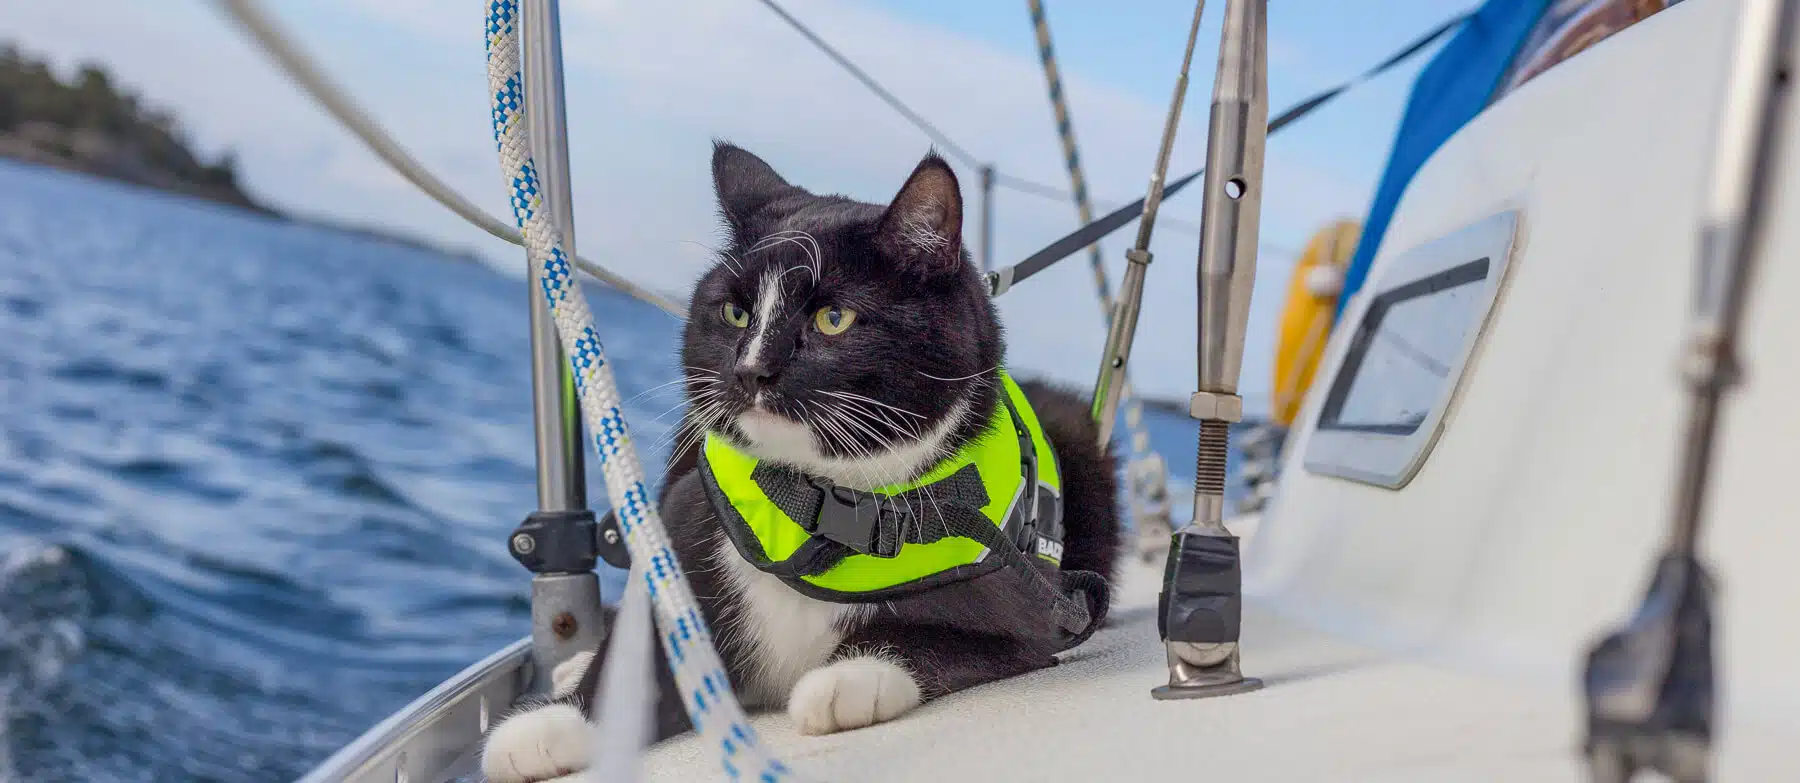 Animals on board: cat on deck of sailing yacht / sailboat